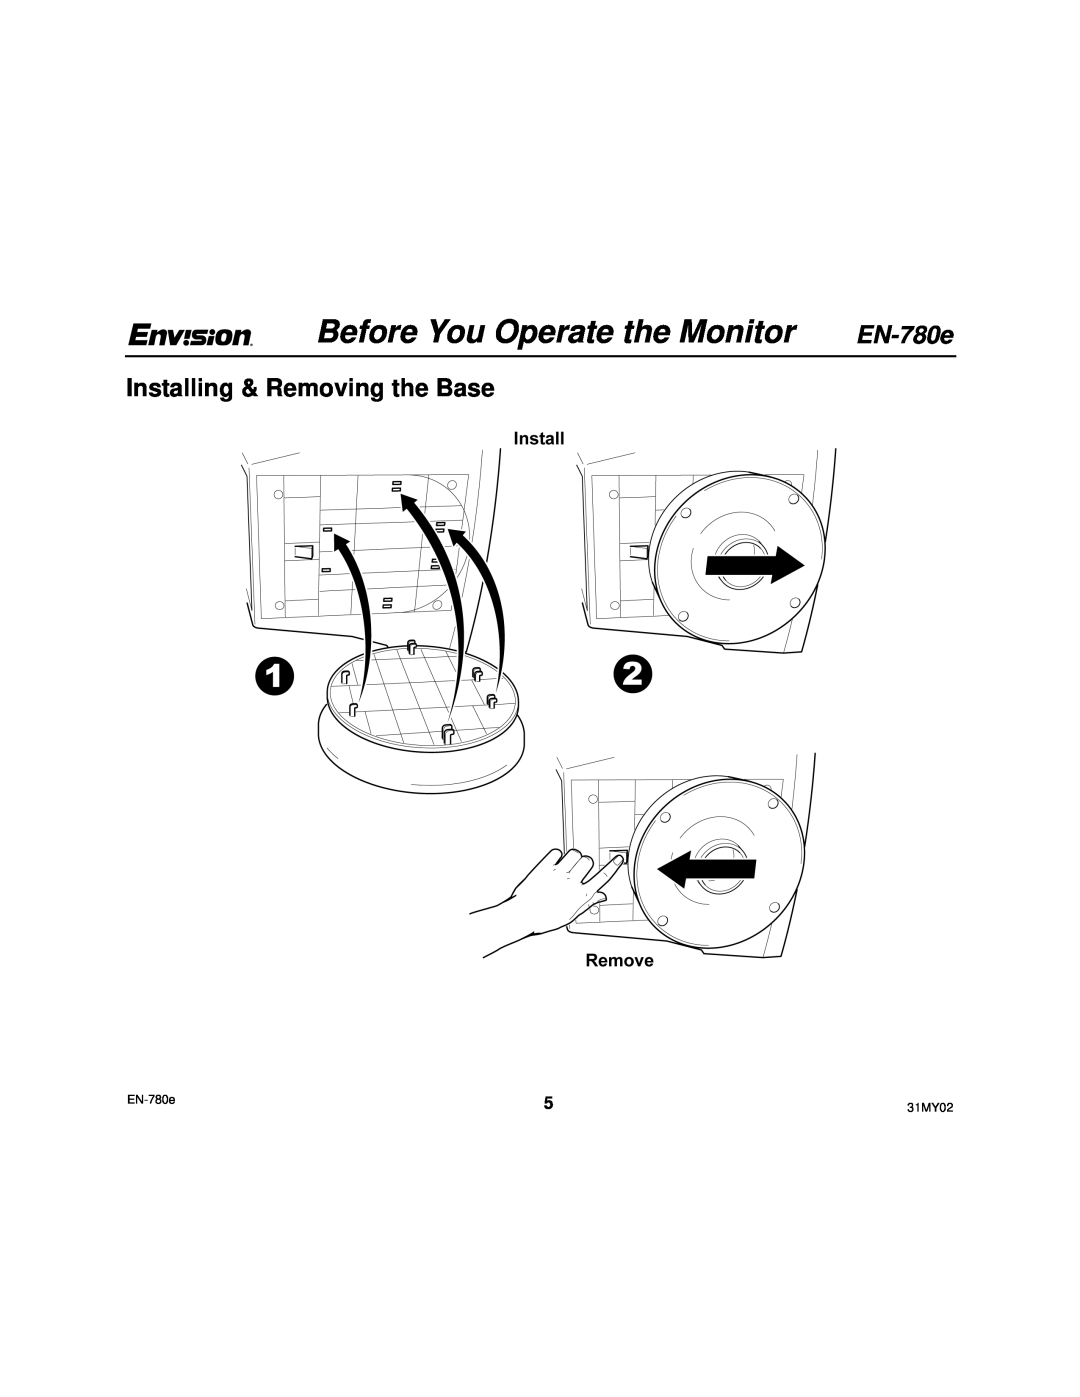 Envision Peripherals EN-780e user manual Before You Operate the Monitor, Installing & Removing the Base, 31MY02 